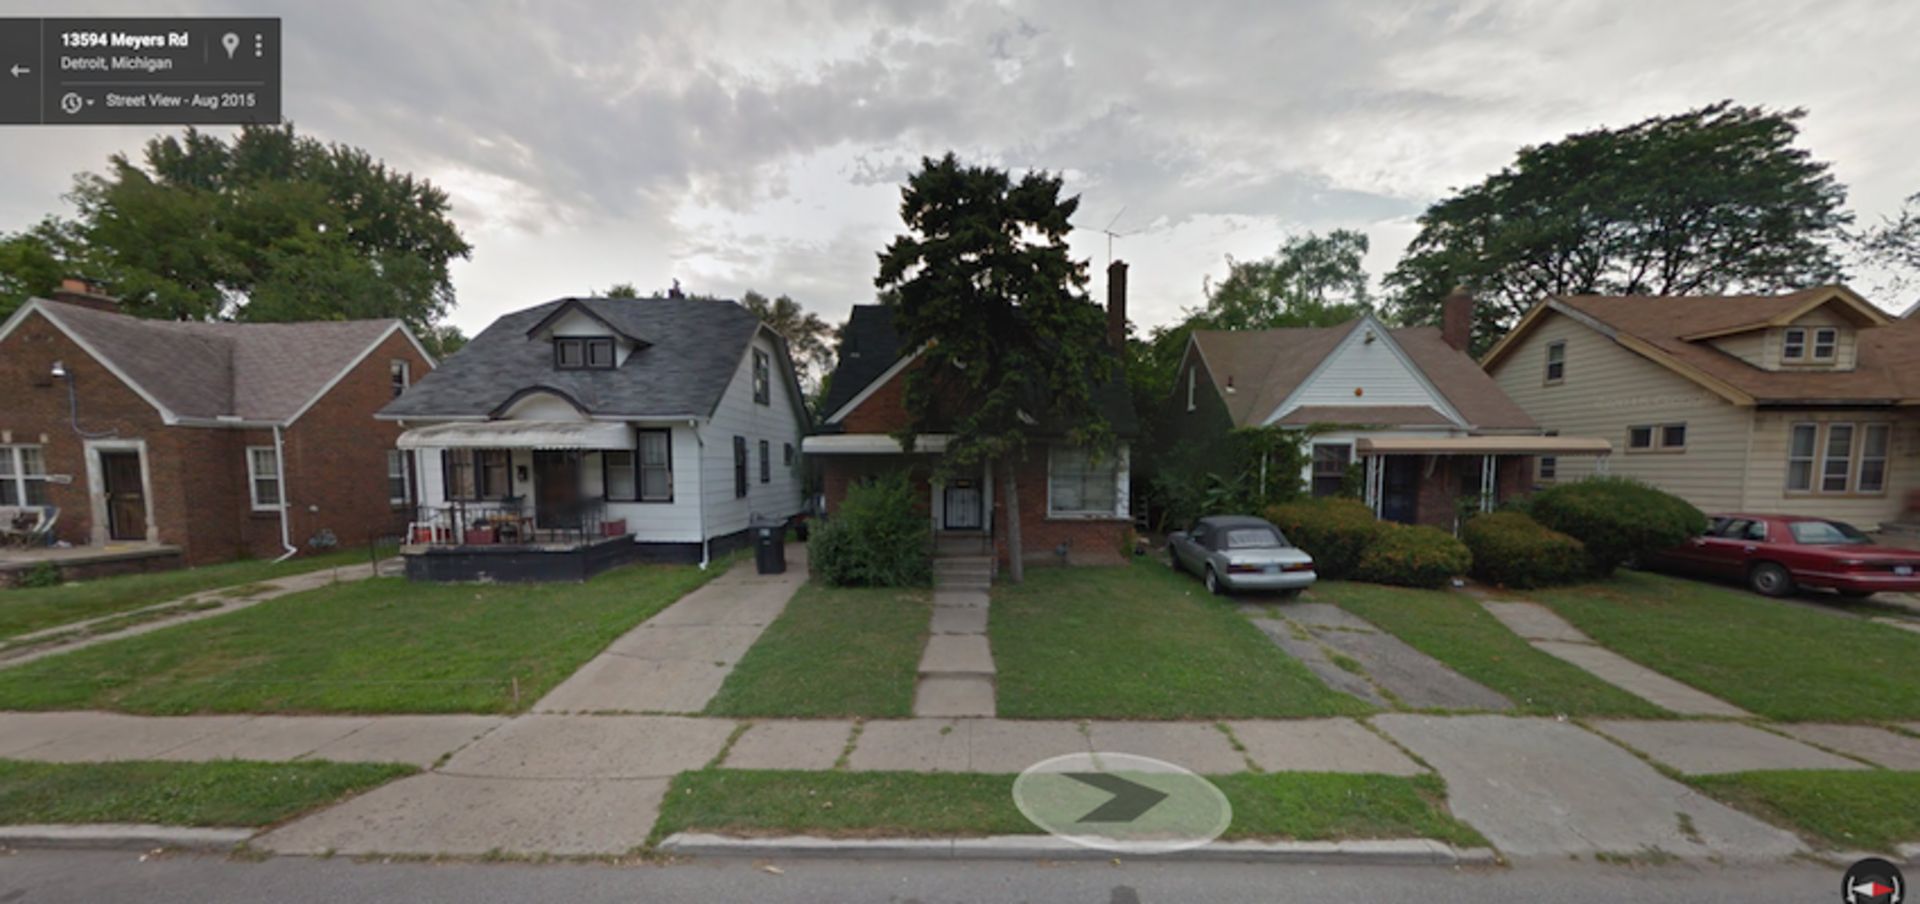 PROPERTY IN 13593 MEYERS RD, DETROIT - Image 2 of 4